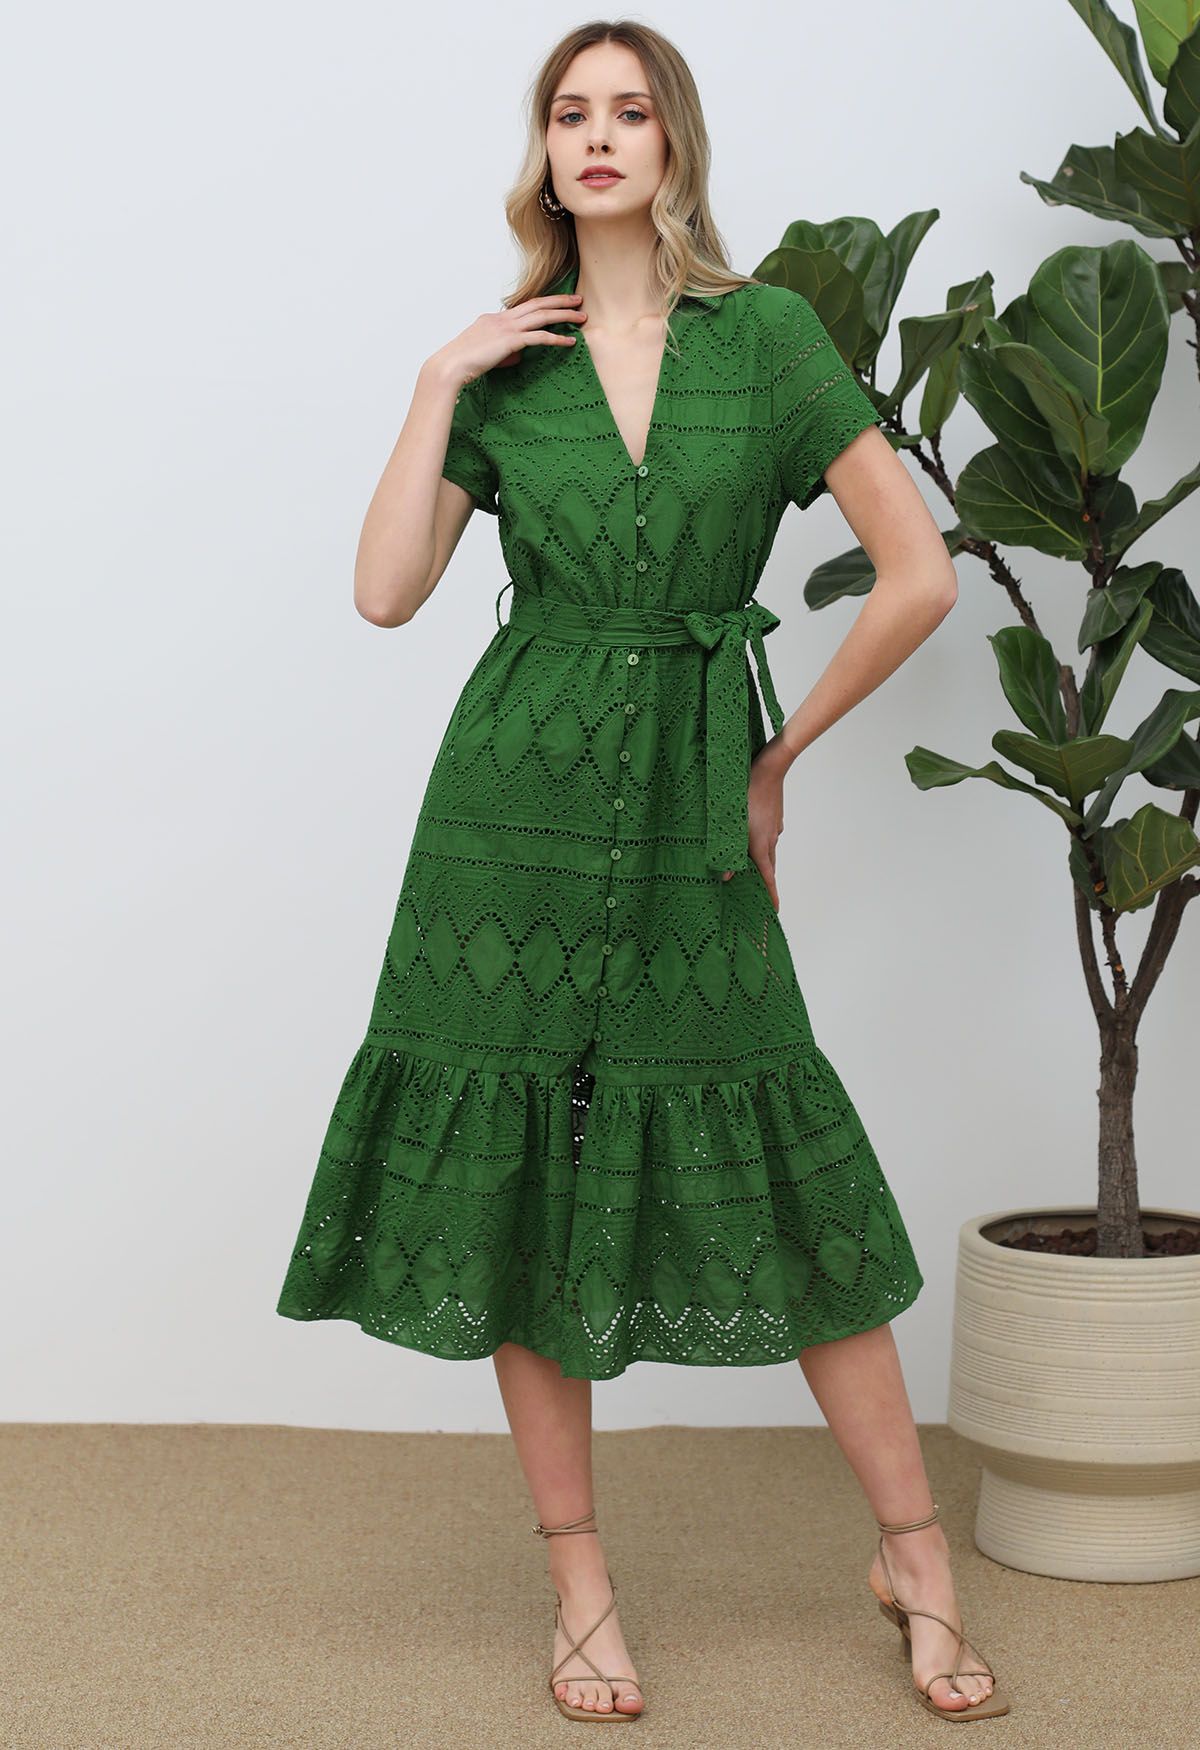 Greenery in Spring Embroidered Eyelet Frilling Dress